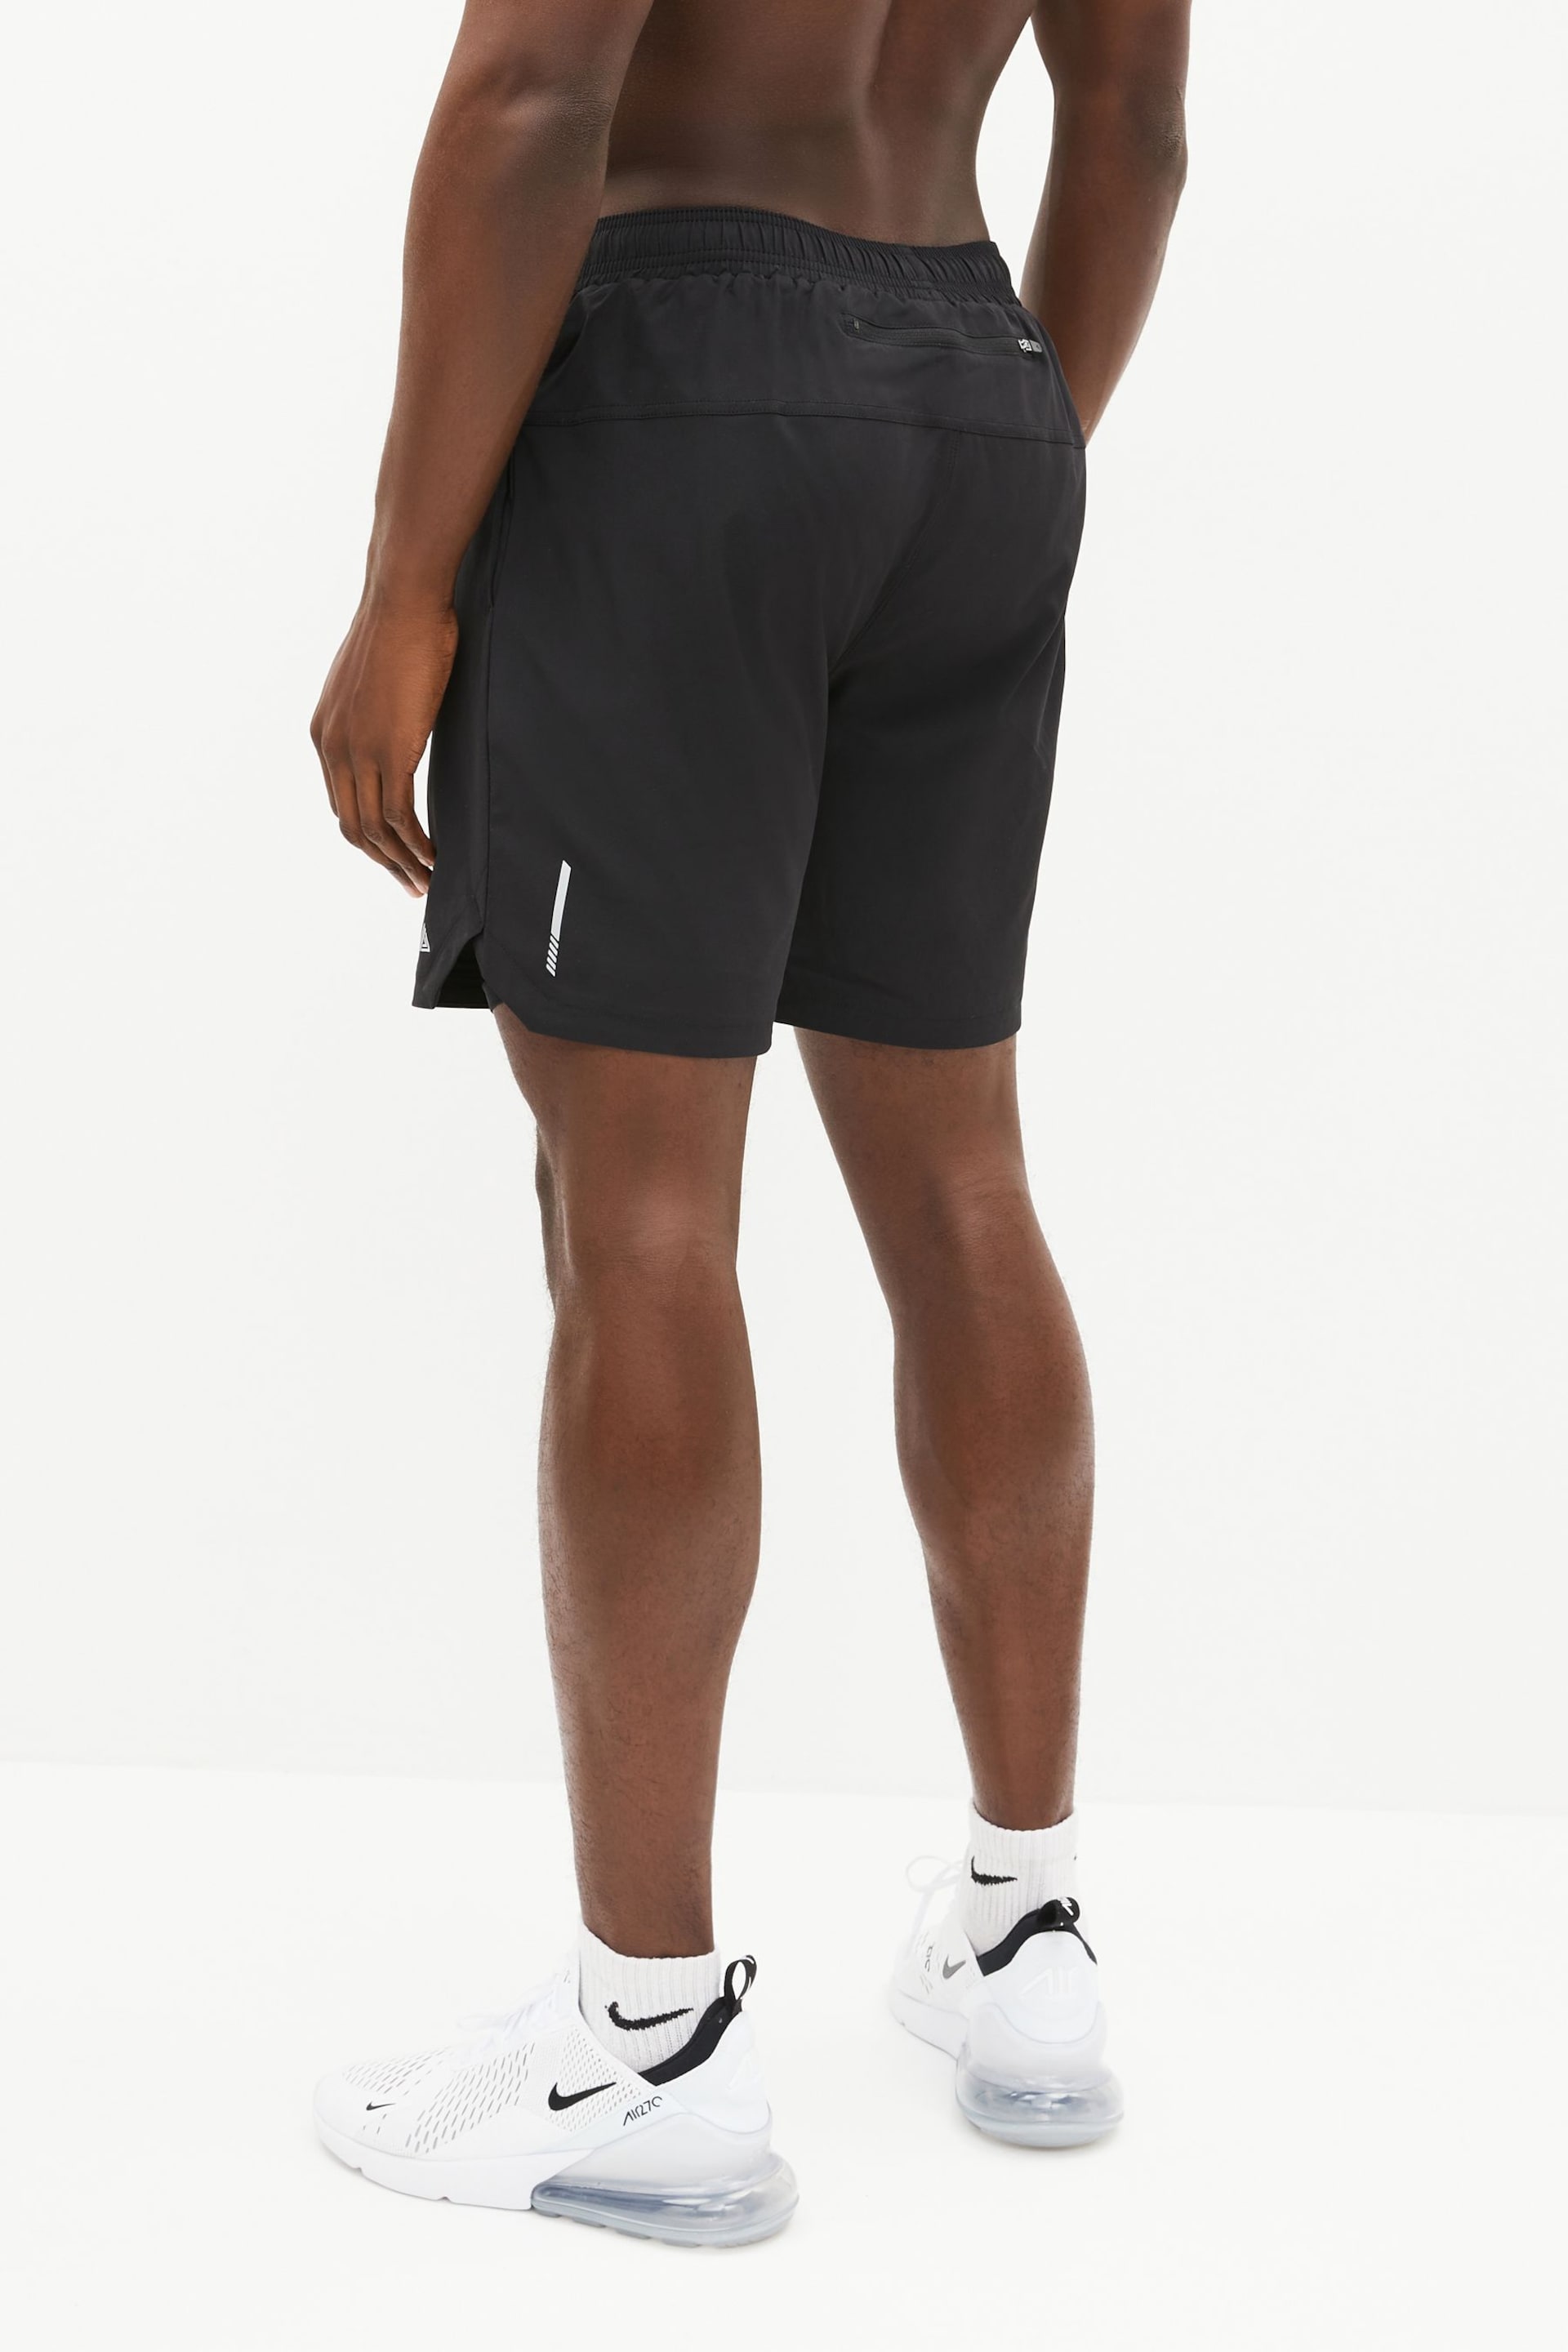 Black Training Shorts With Liner - Image 5 of 11